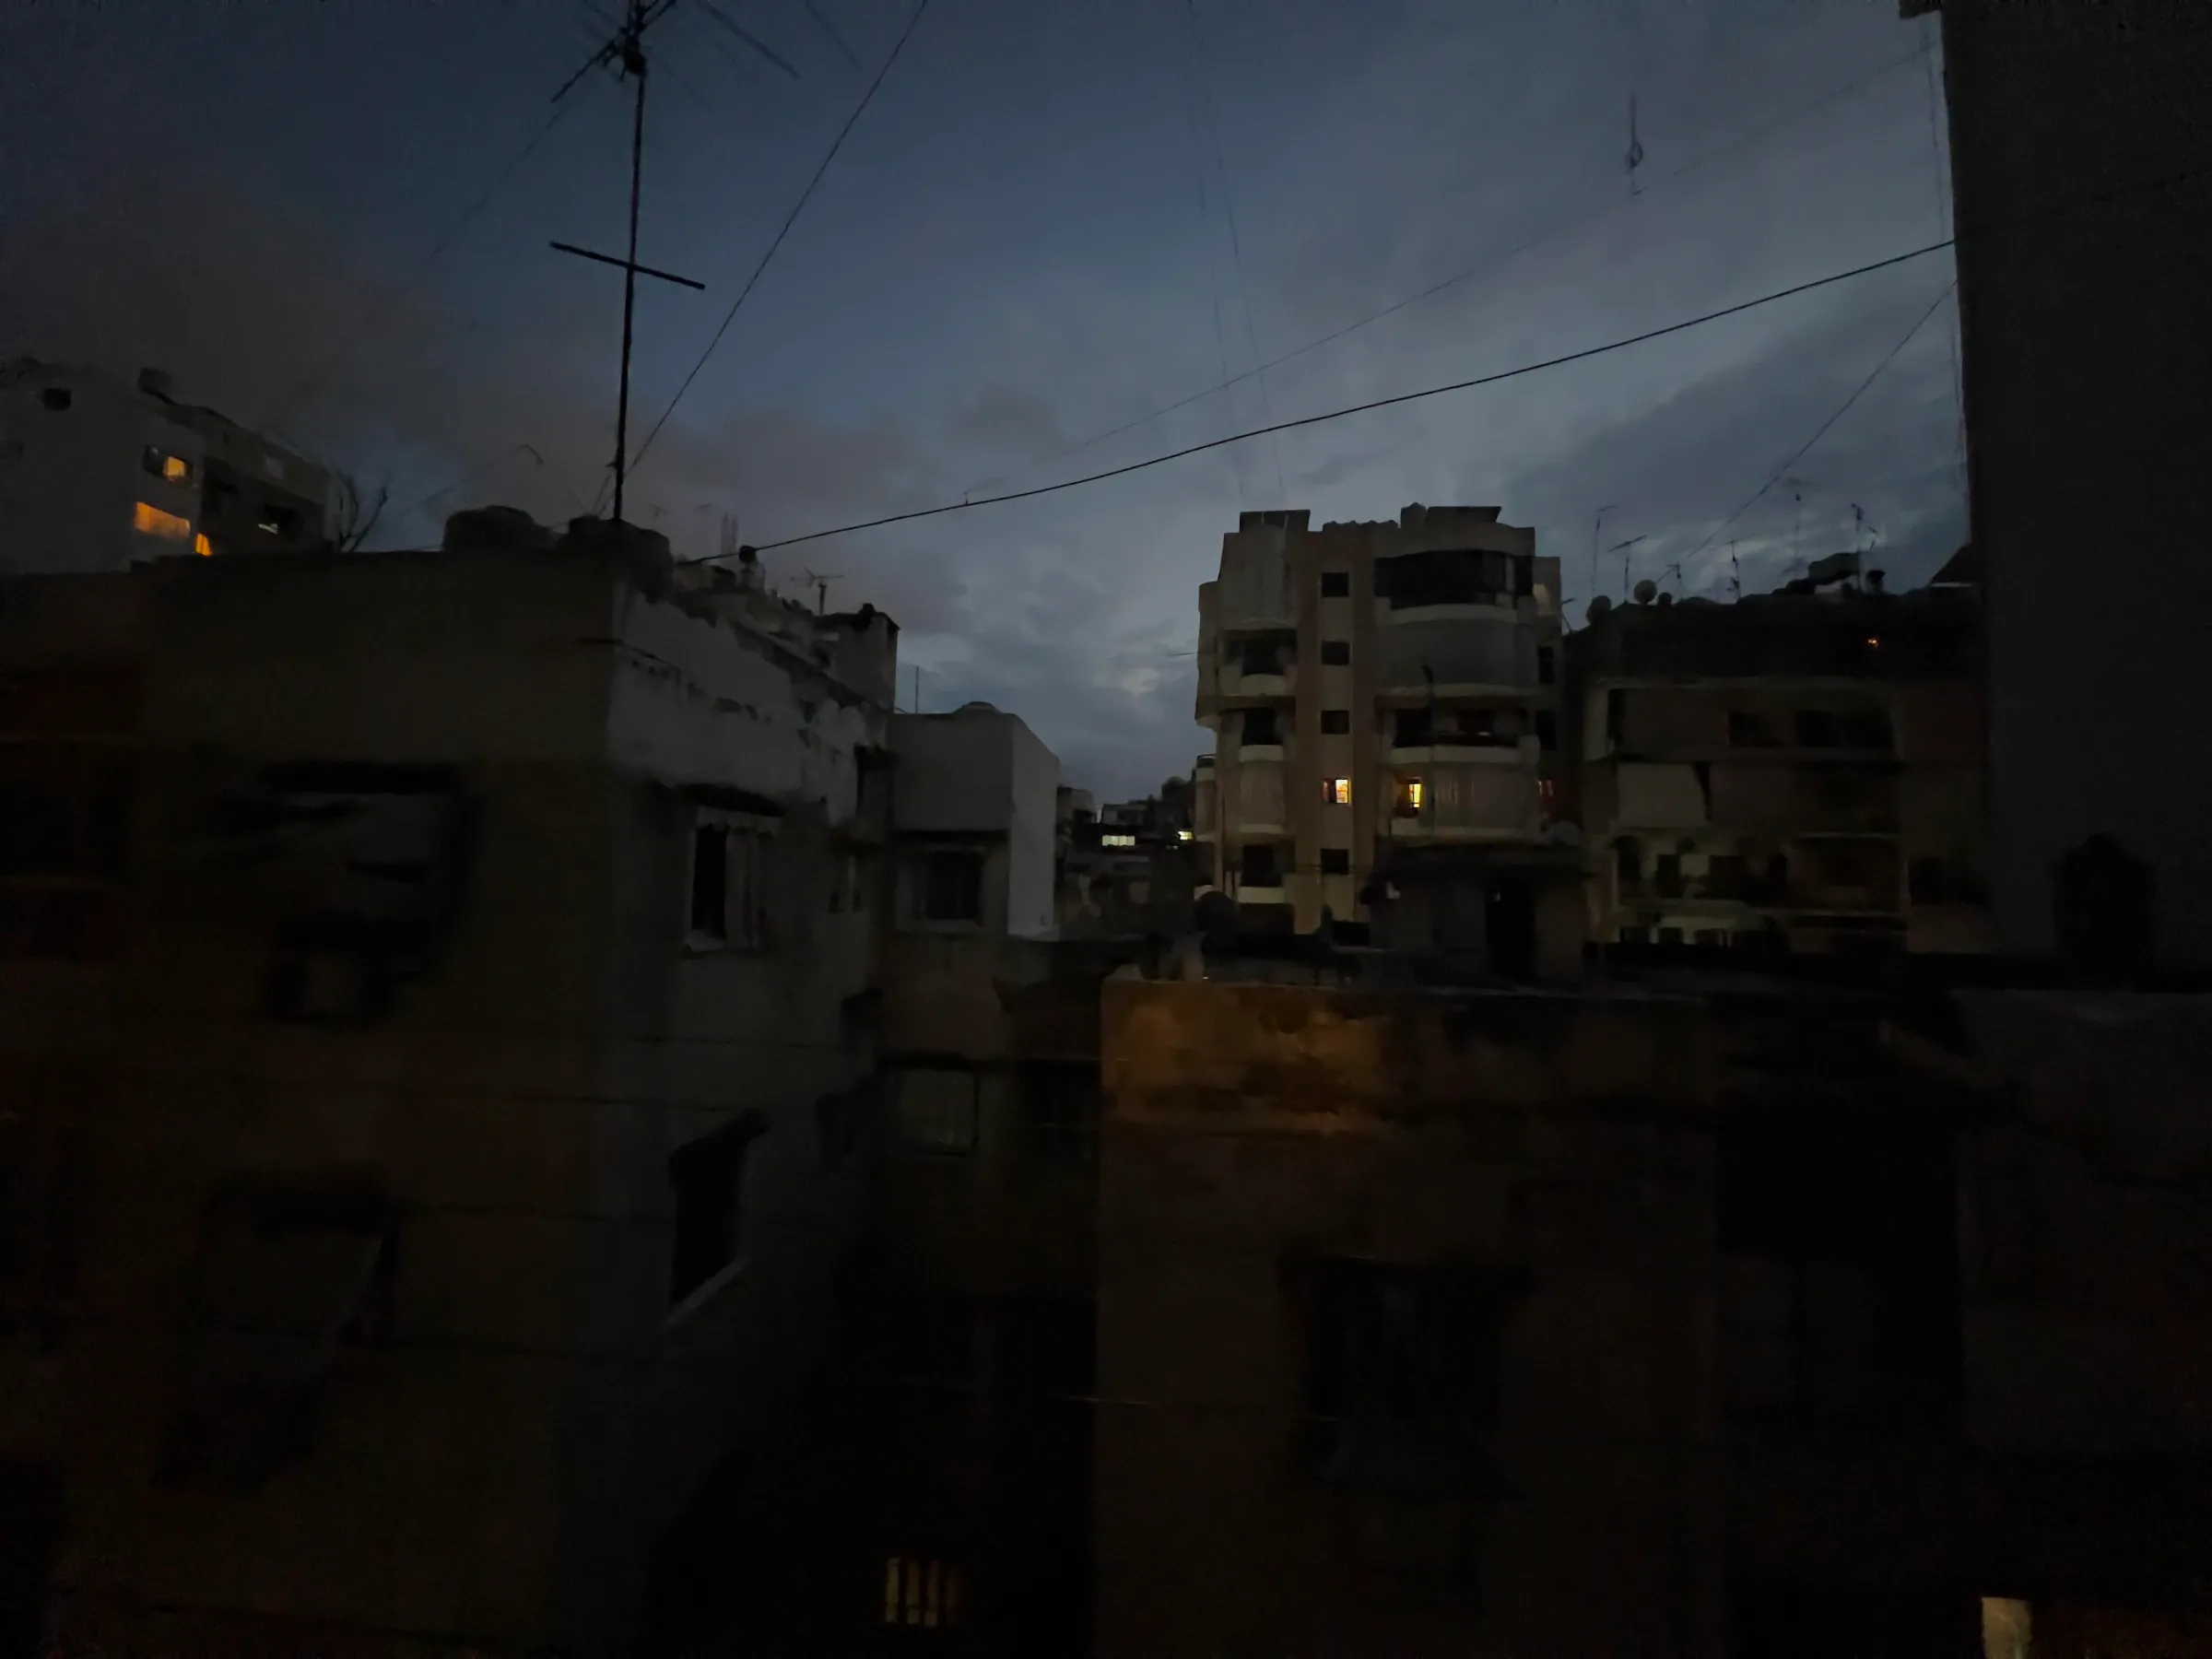 A rooftop in Beirut plunged into darkness as the country faces constant power shortages. Beirut, Lebanon. November 16, 2022. Thomson Reuters Foundation/Tala Ramadan